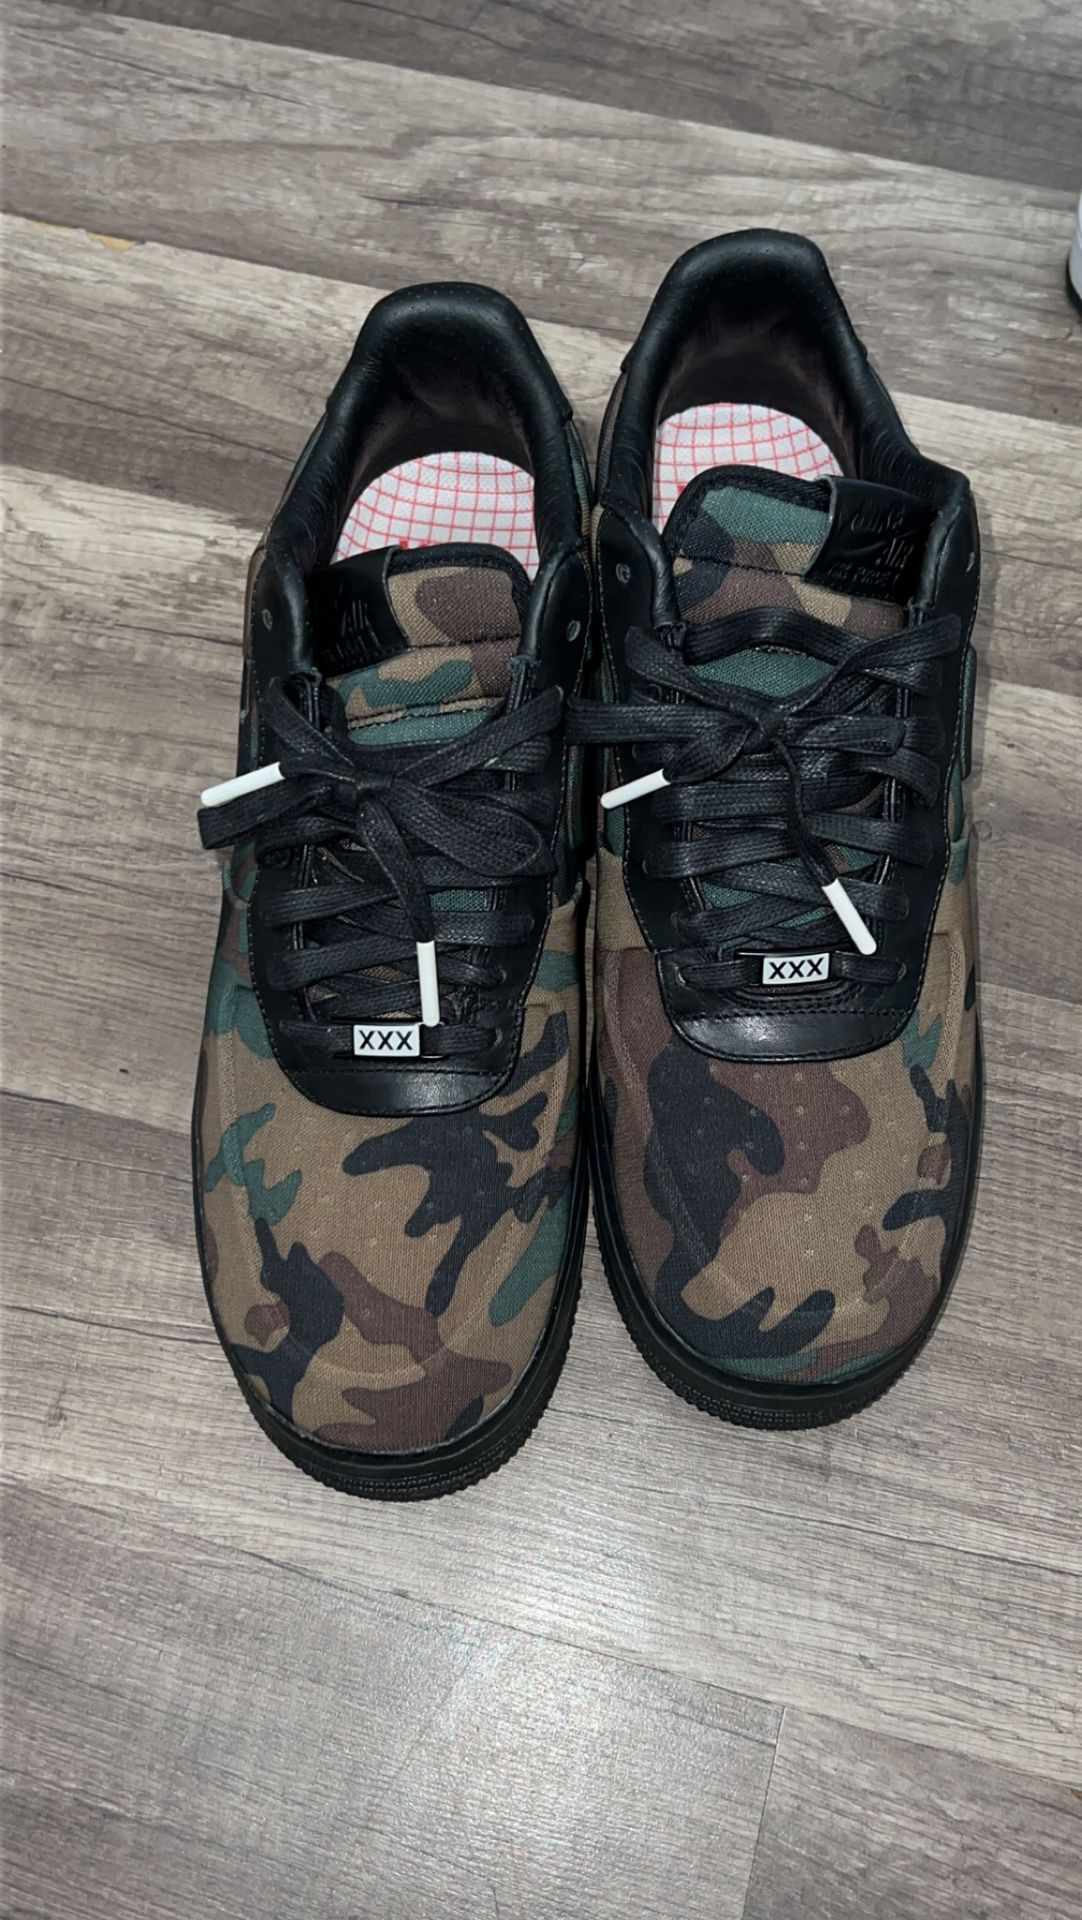 Impermeable natural Desviación Air Force 1 Low Max Air VT QS 'Camo' - 530989-090, Black for Sale in  Pomona, CA - OfferUp